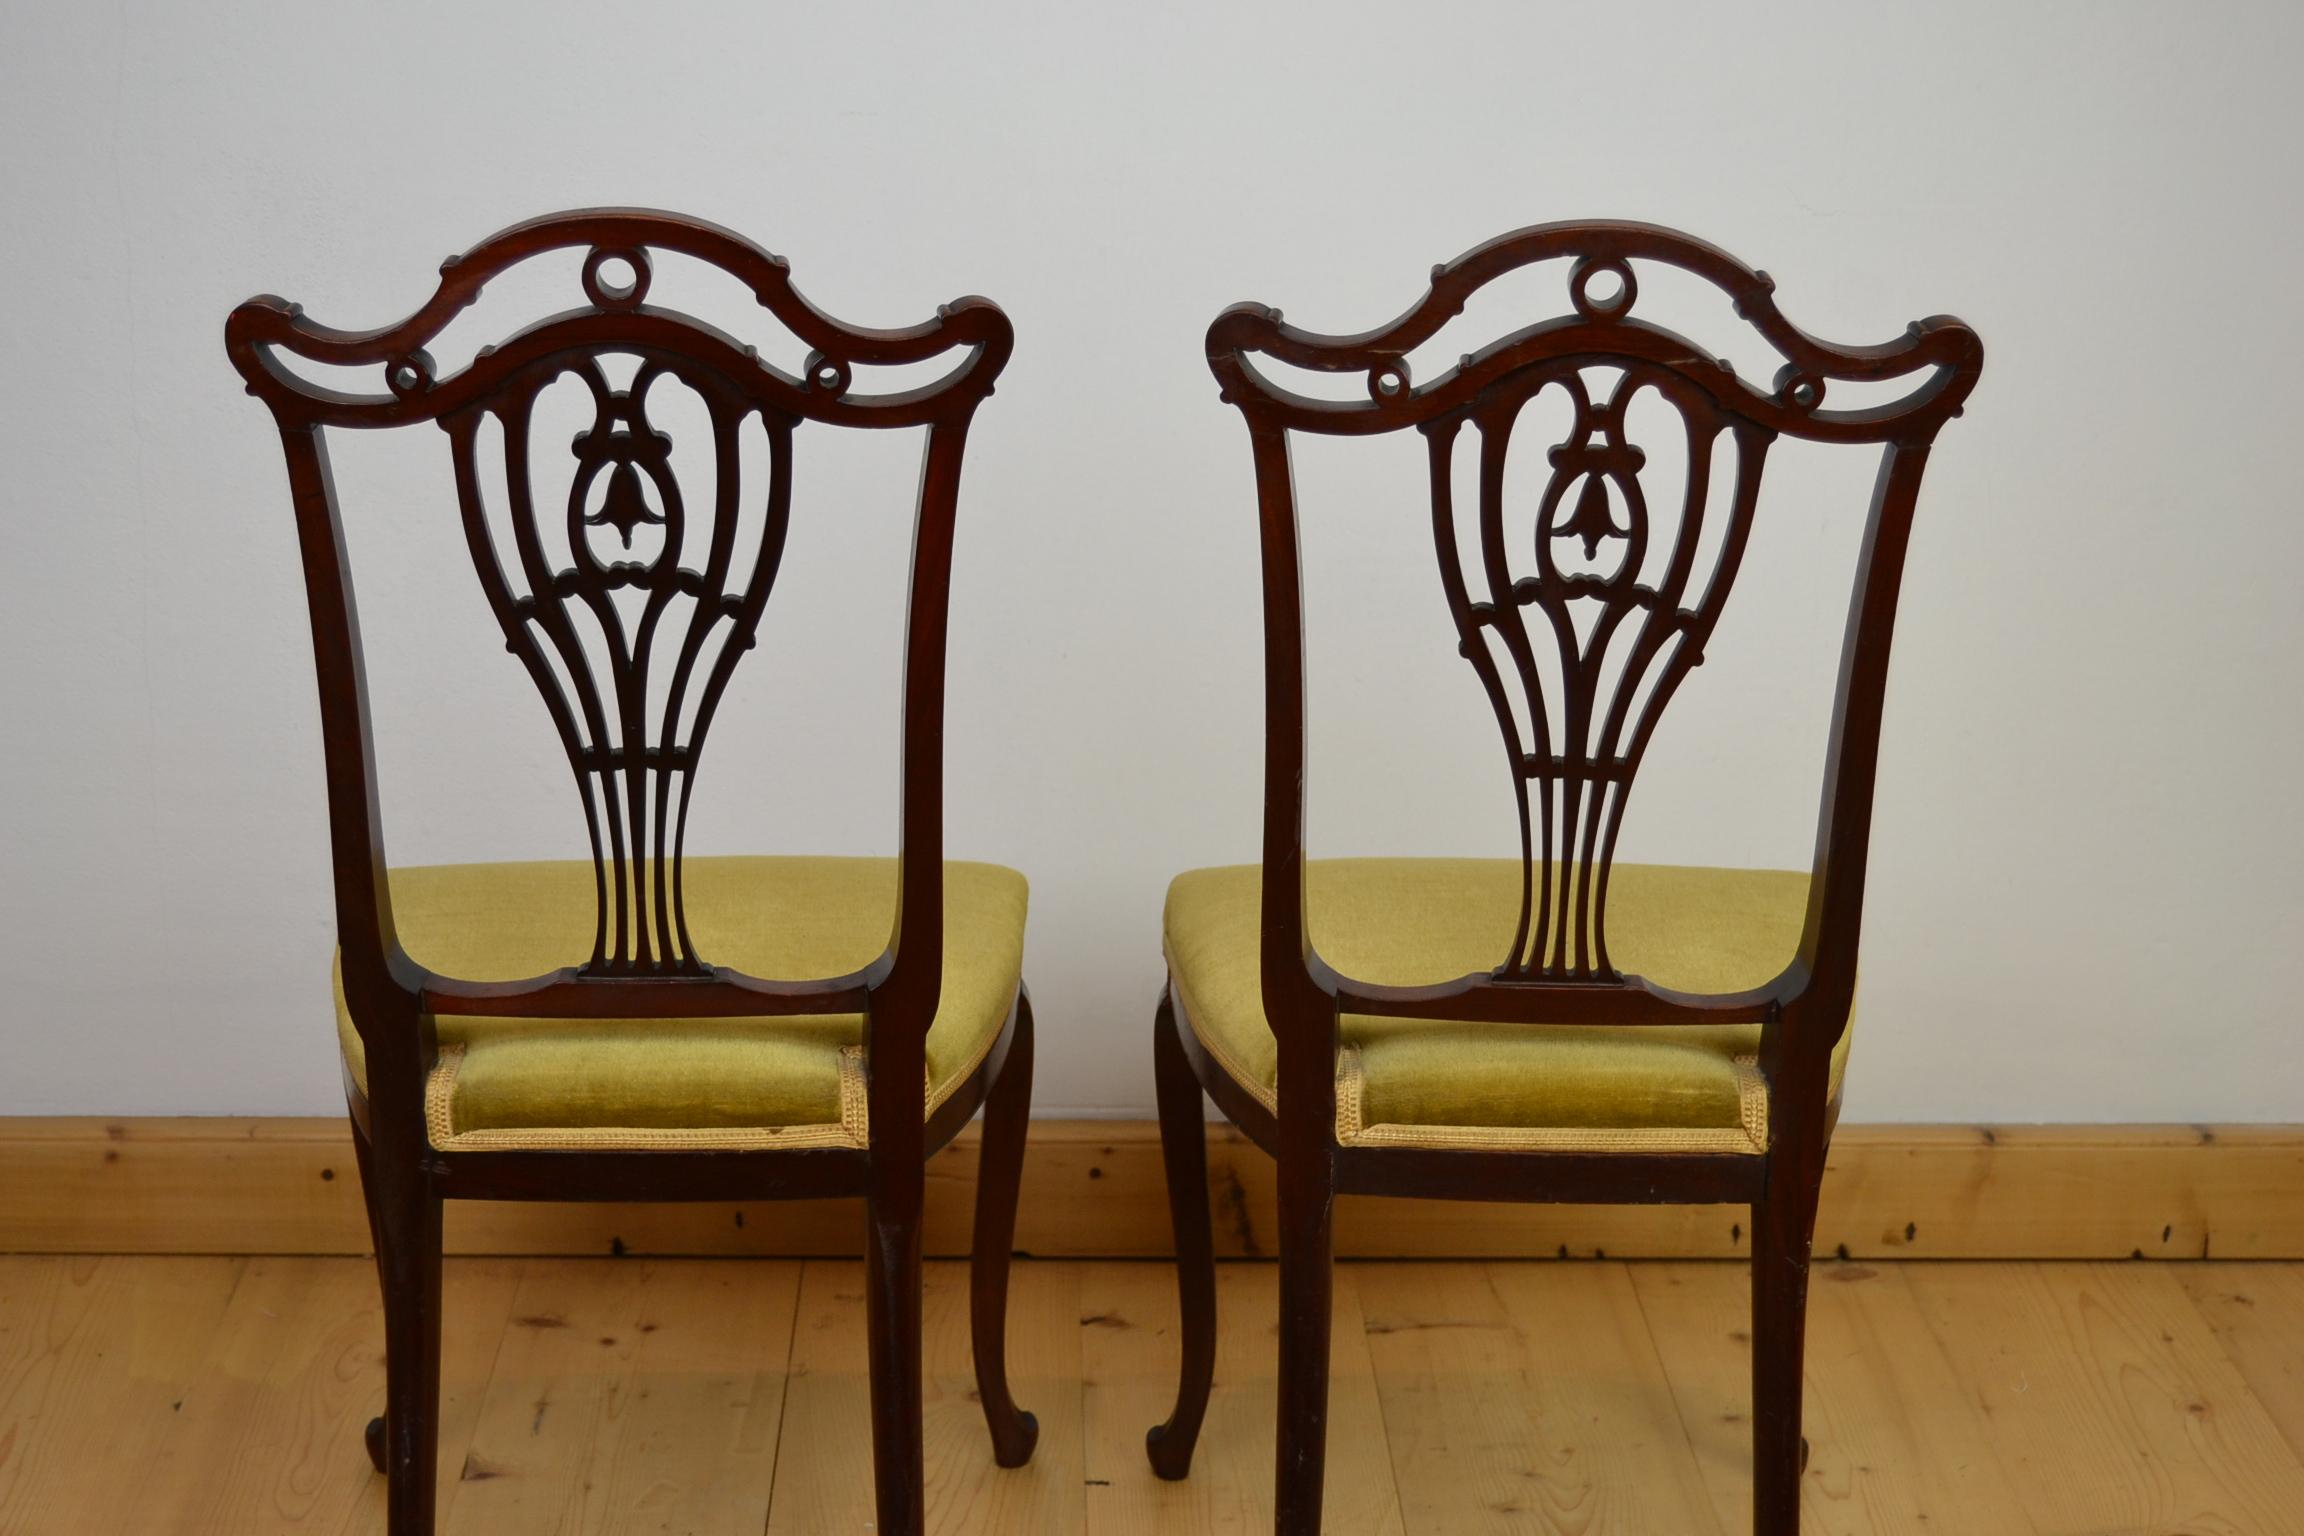 Hollandia Pander & Zn Pair of Side Chairs, Late 19th Century For Sale 8